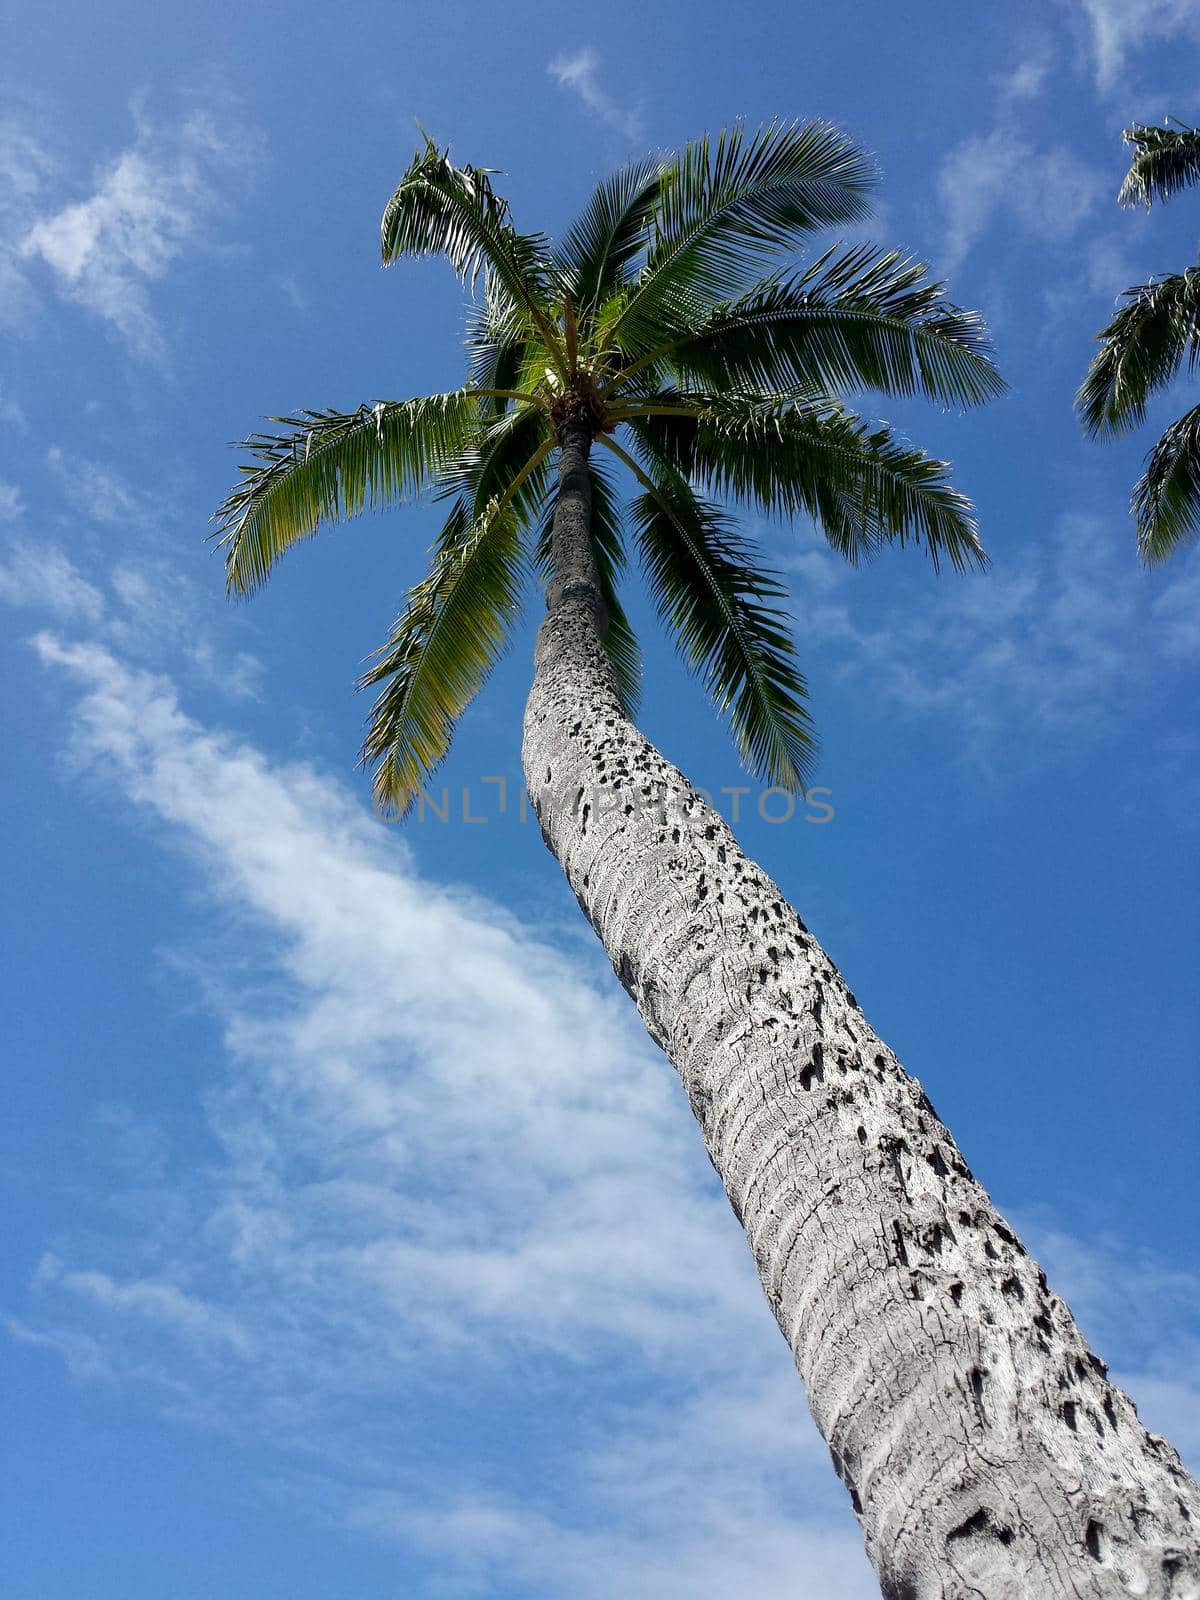 Coconut Tree and Blue Sky with Clouds by EricGBVD